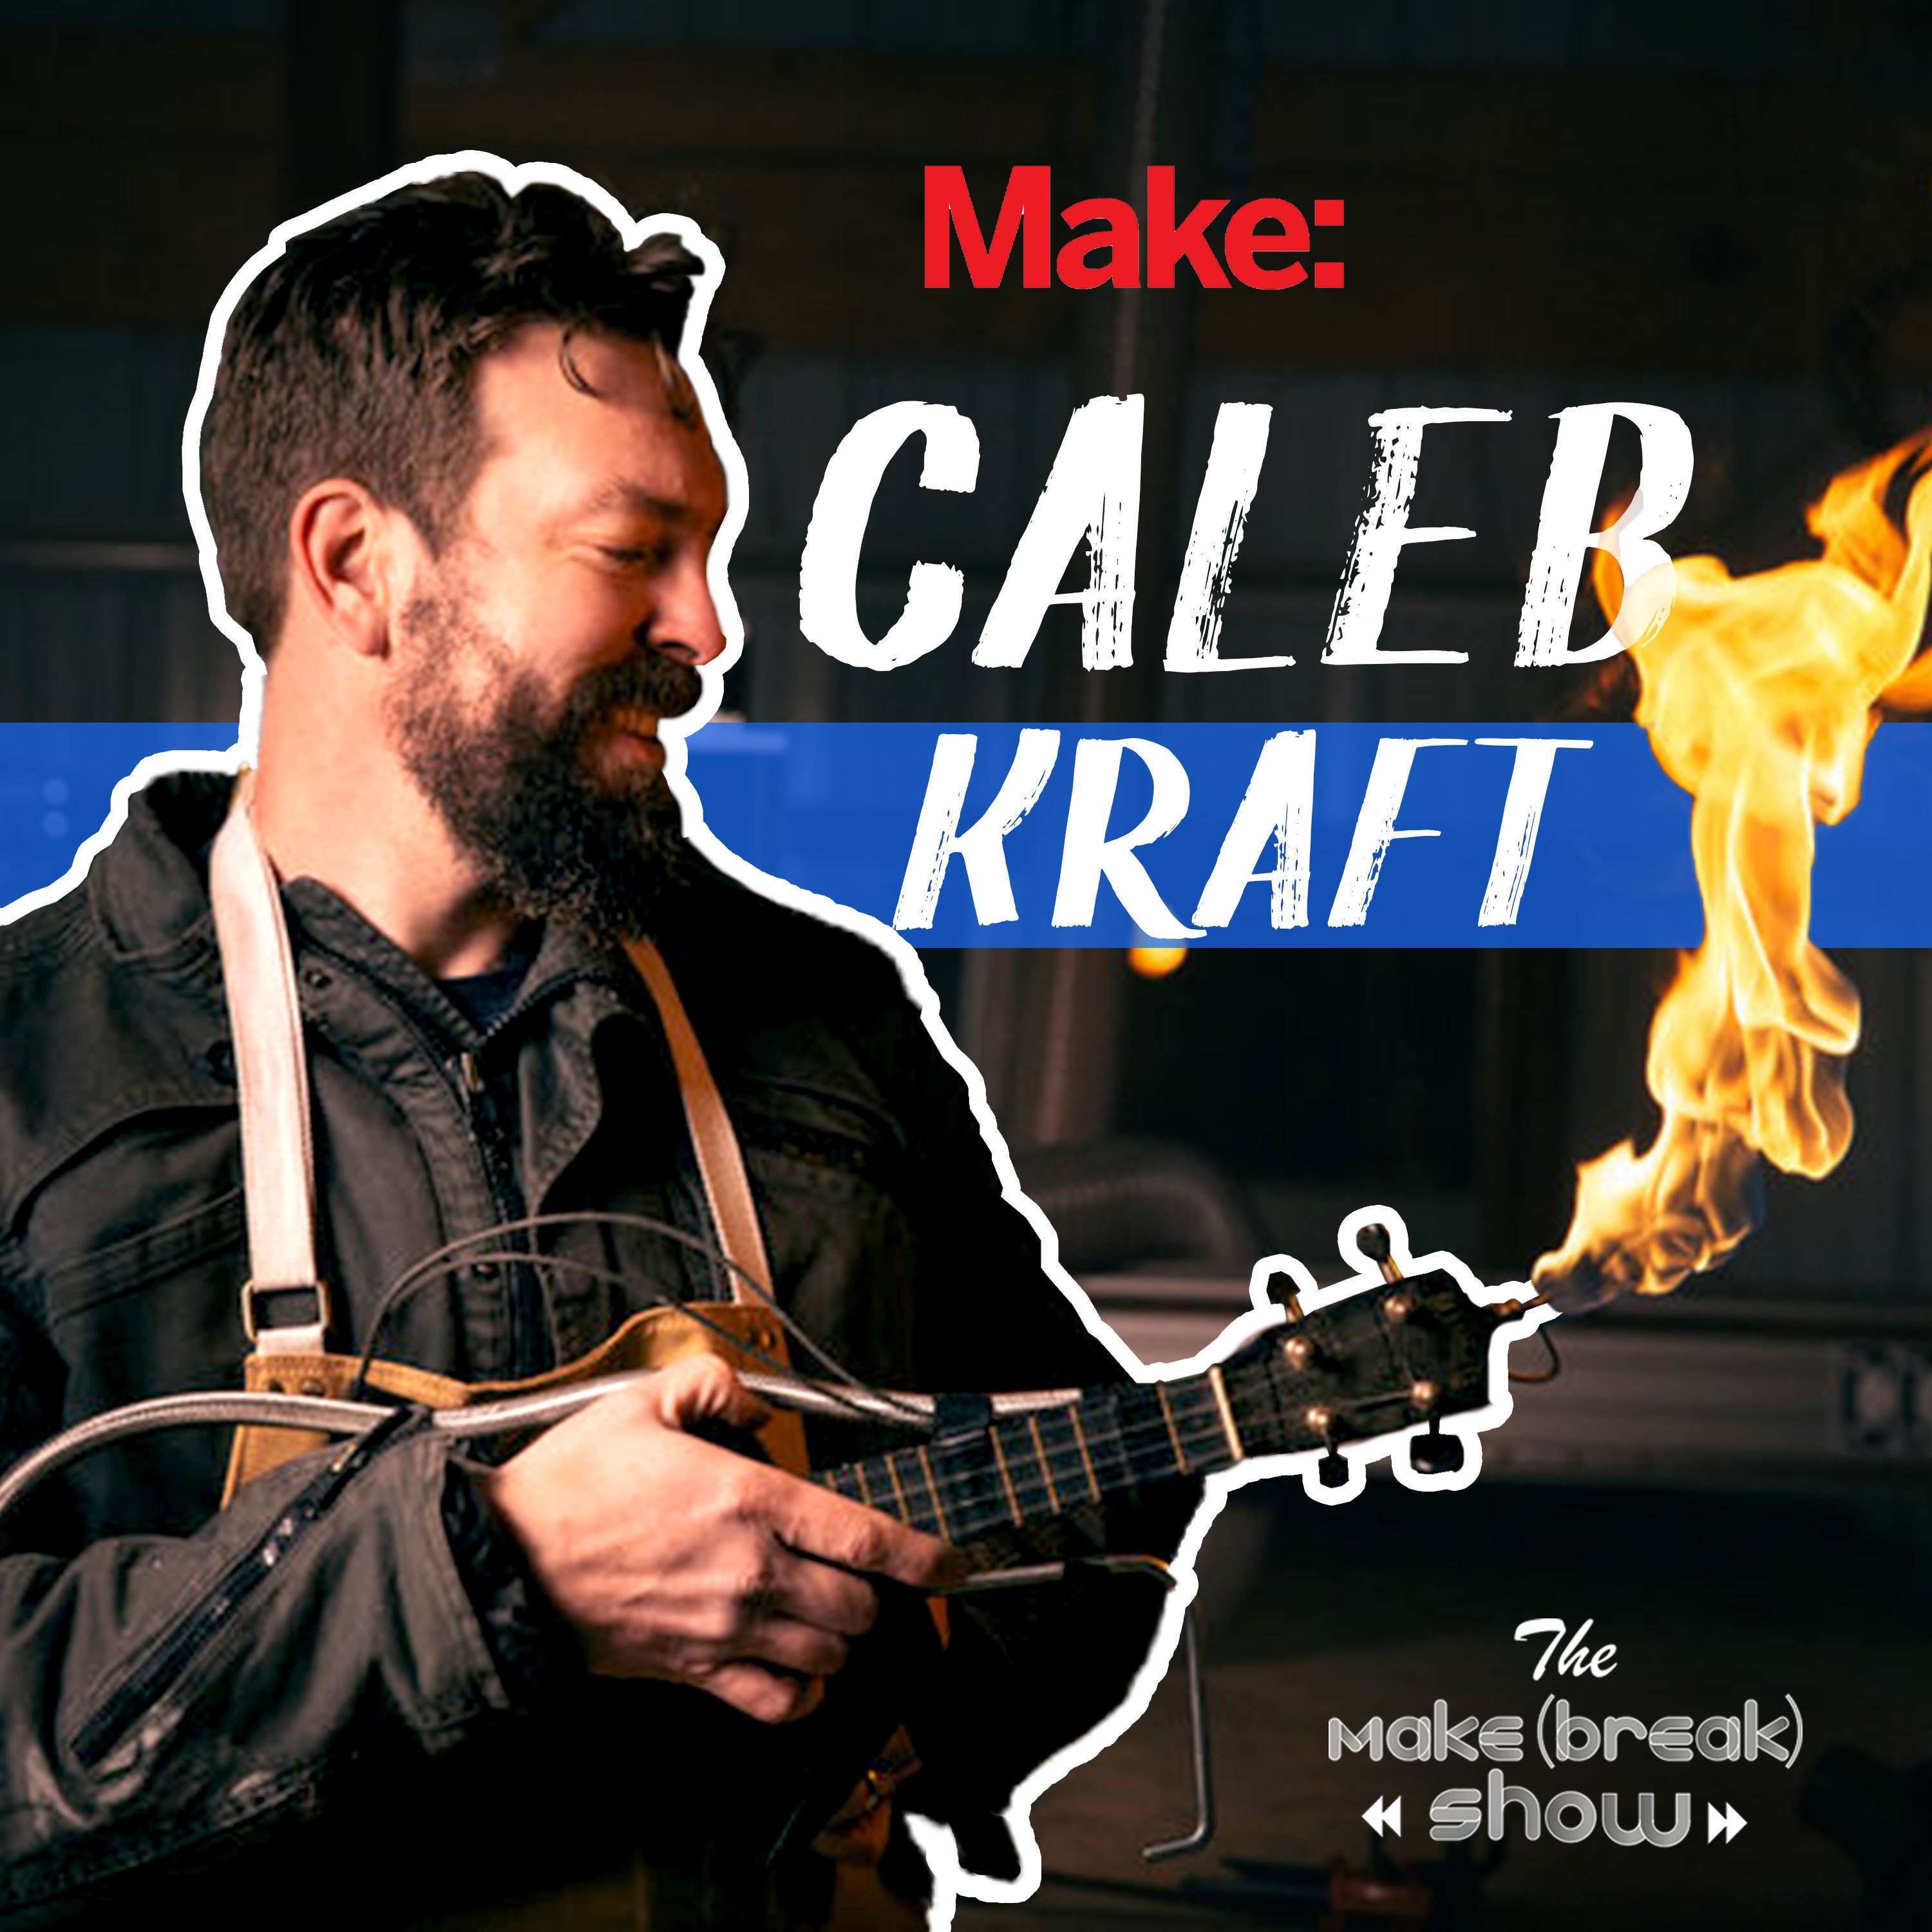 037: Machining, Flame-throwing and more with Make:'s Caleb Kraft